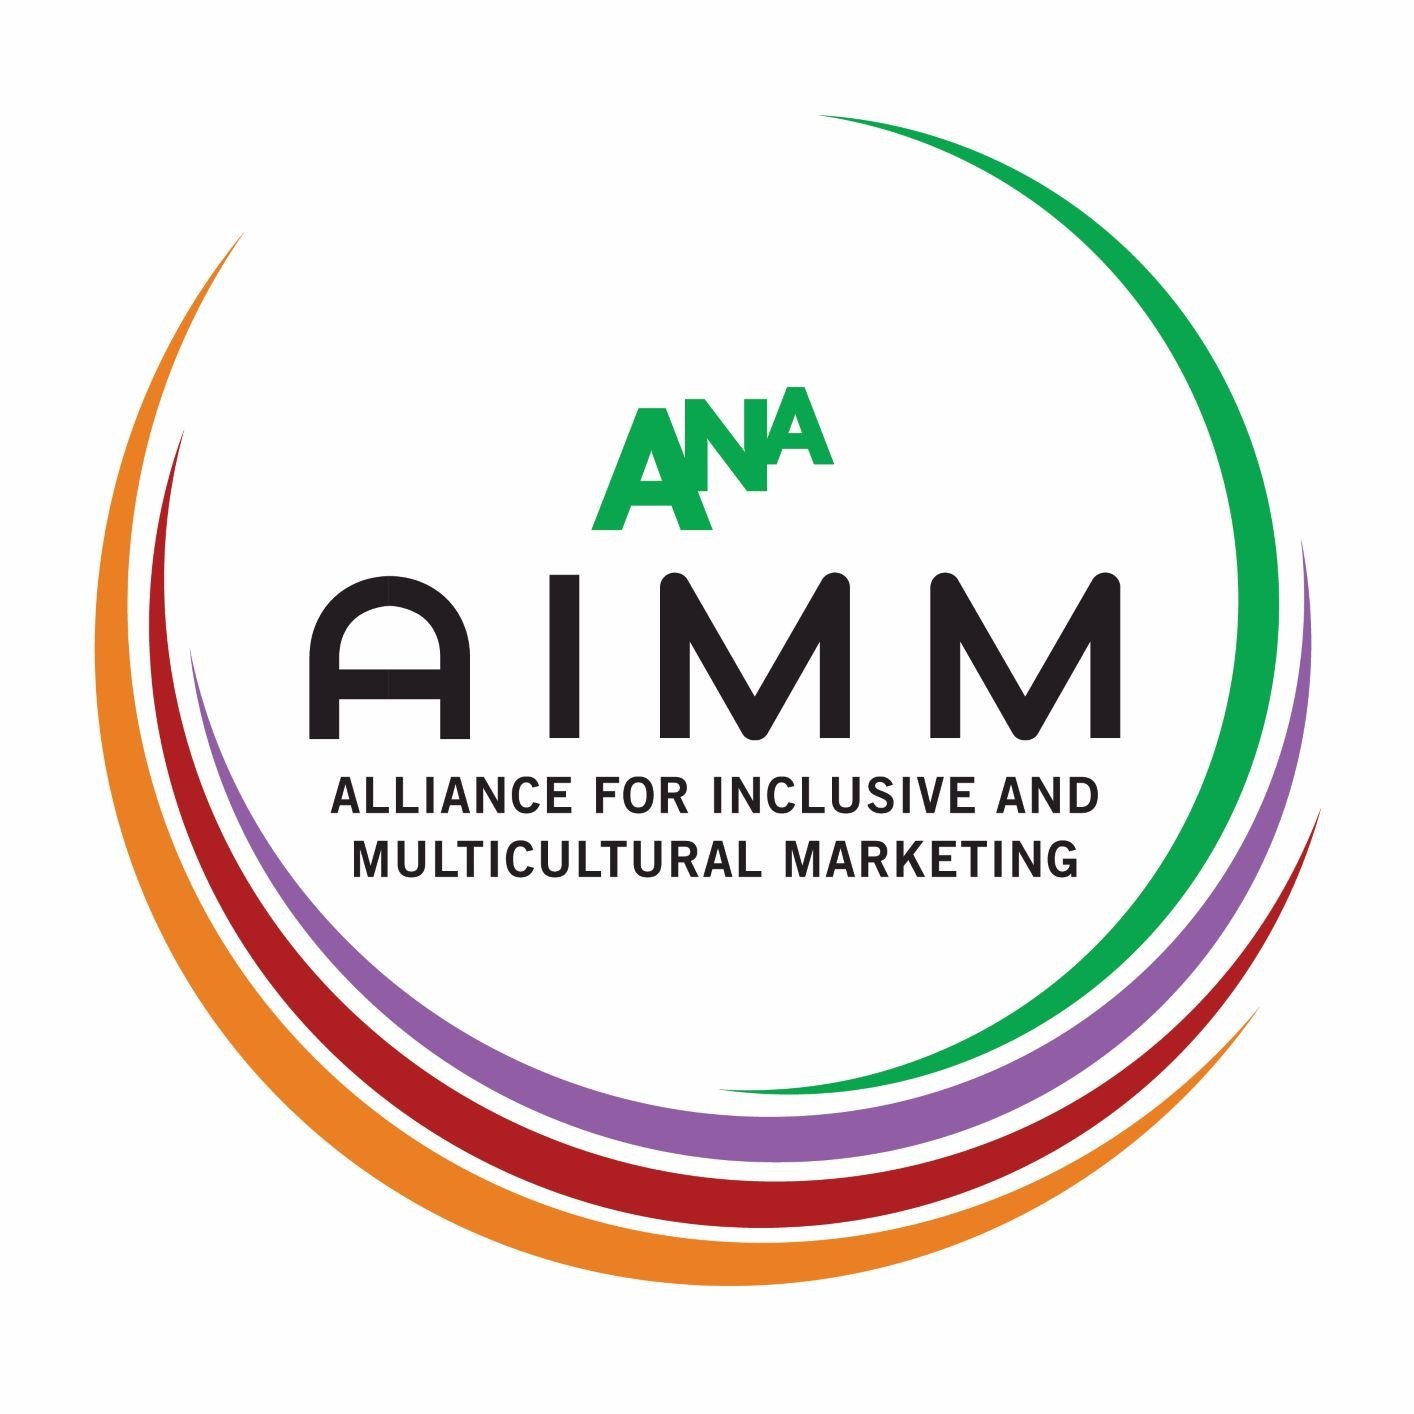 ANA's Alliance for Inclusive and Multicultural Marketing Challenges Entertainment Industry to